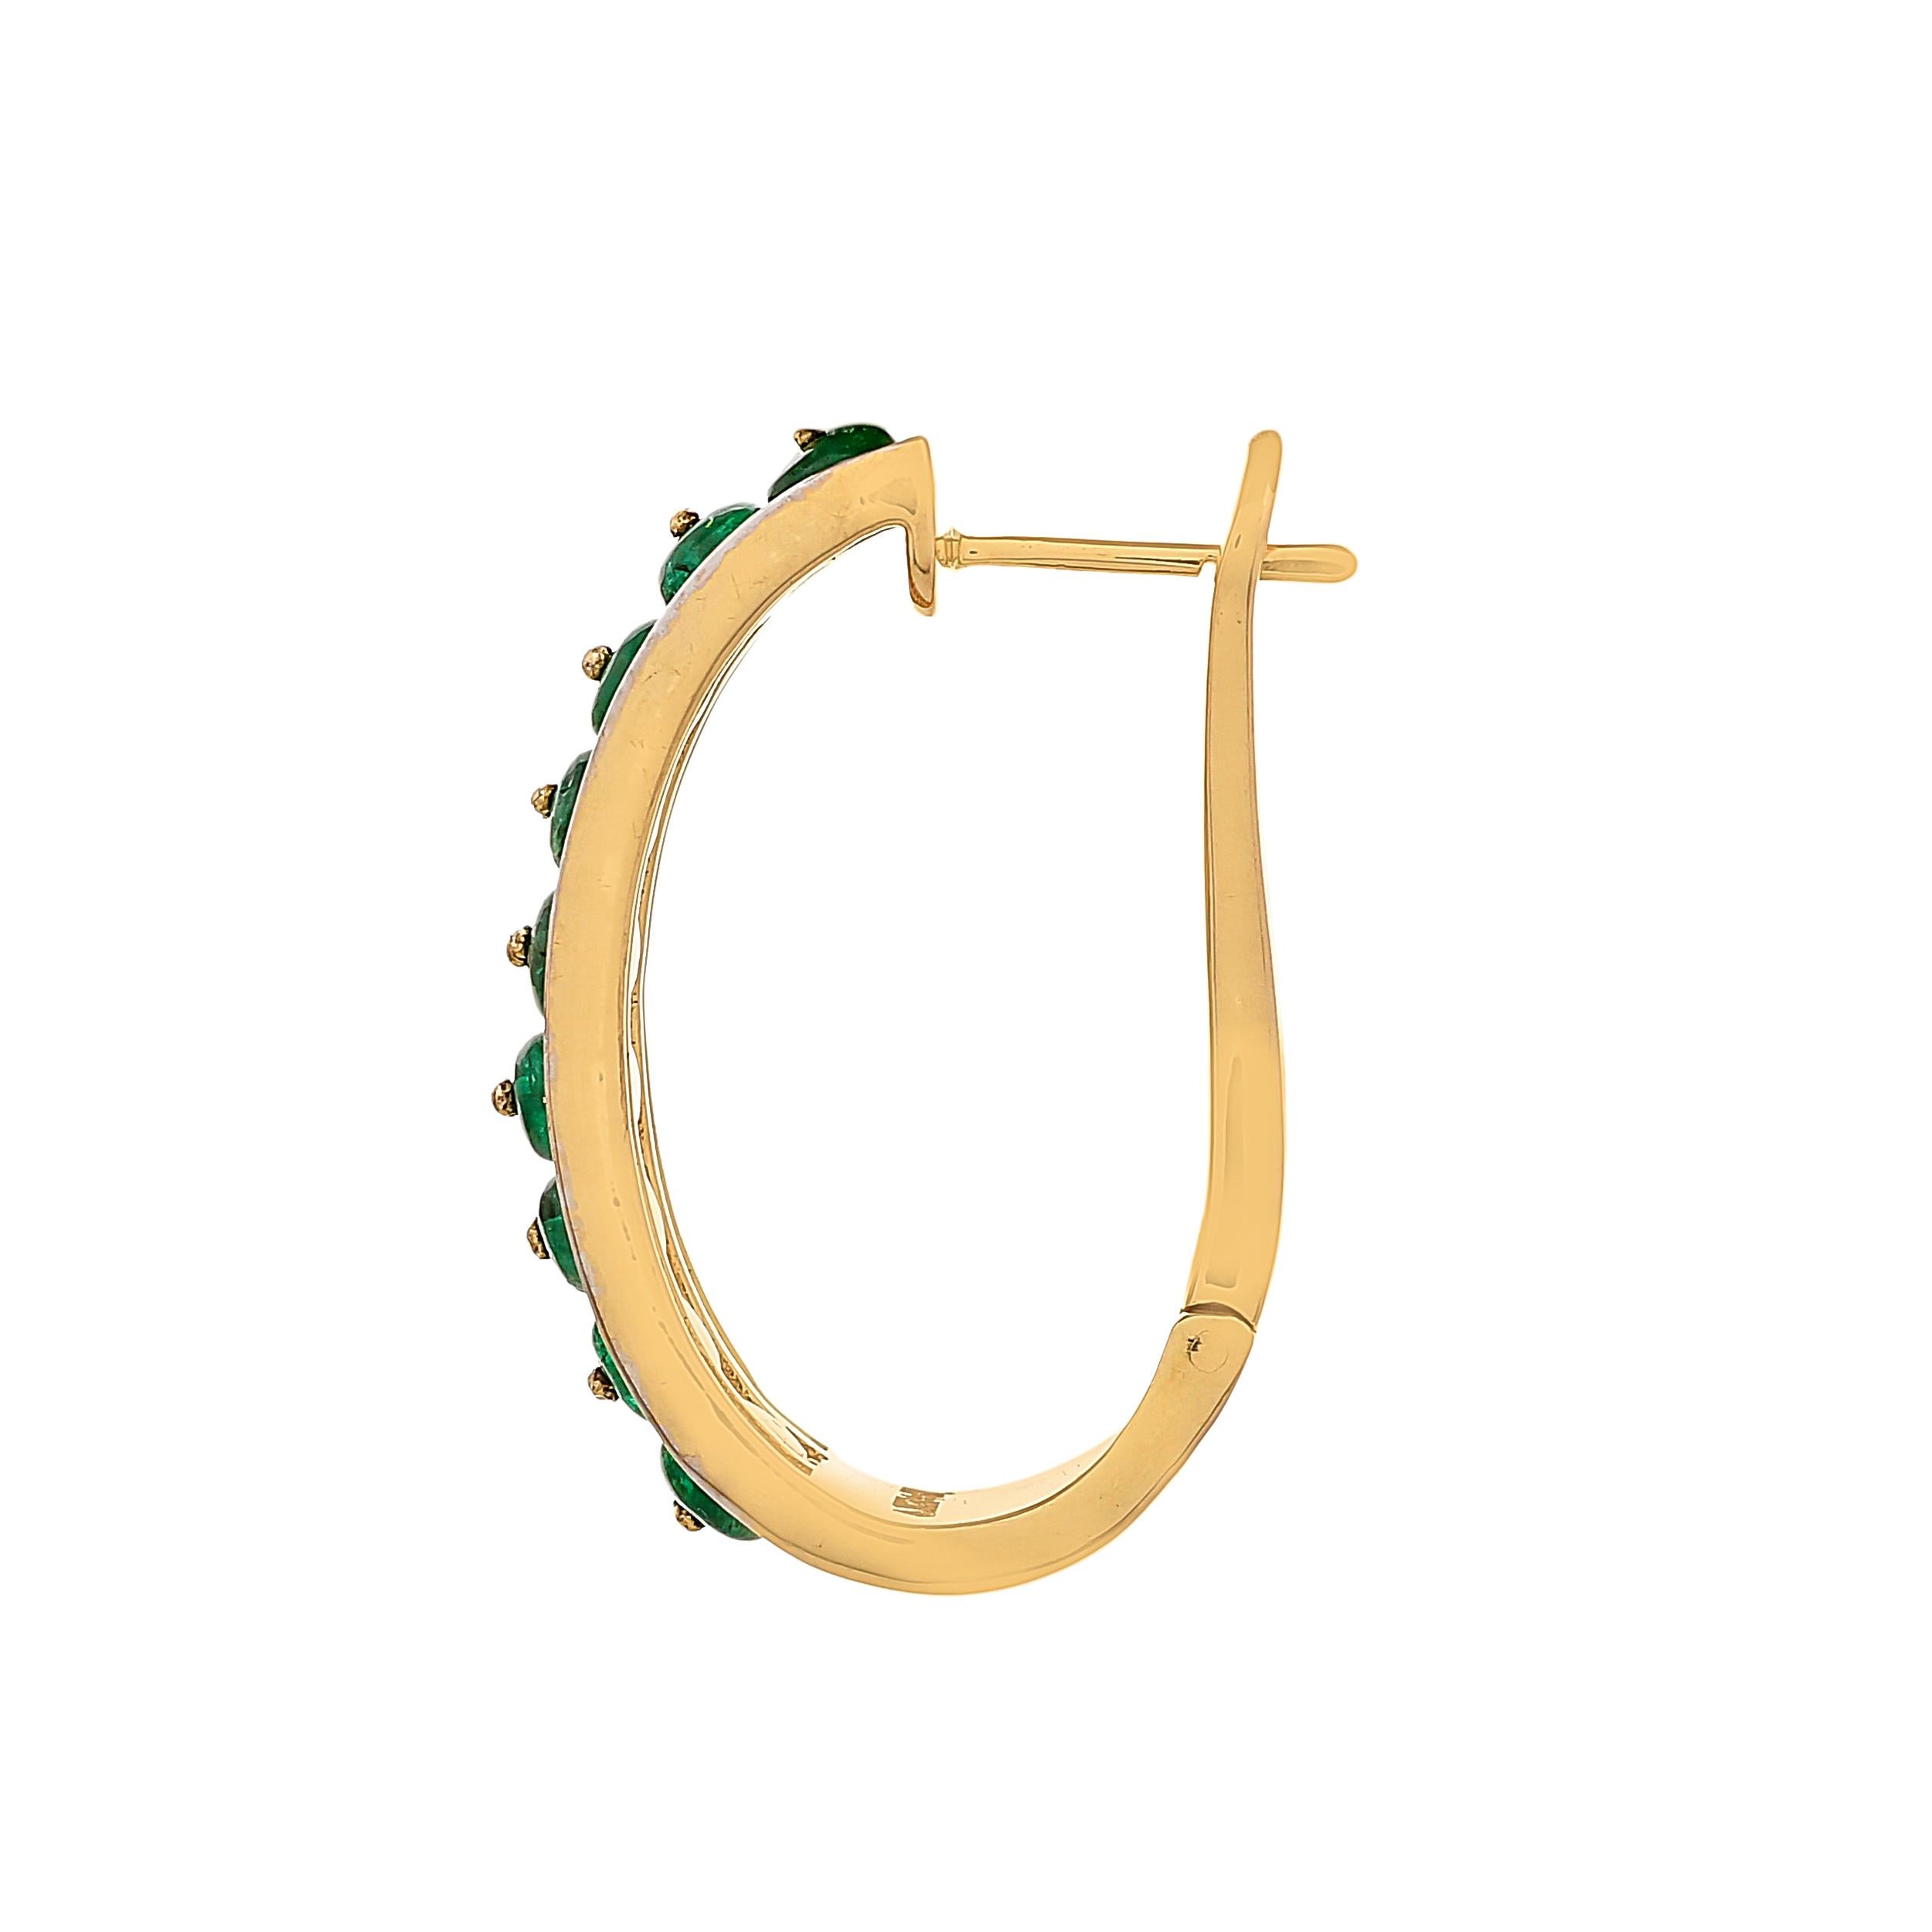 Handcrafted in 18kts yellow gold, these stately linear hoop earrings feature Zambian emerald beads weighing approximately 3.69 carats accented with rows of diamond baguettes with a total diamond weight of 2.39 carats showcasing the craft with